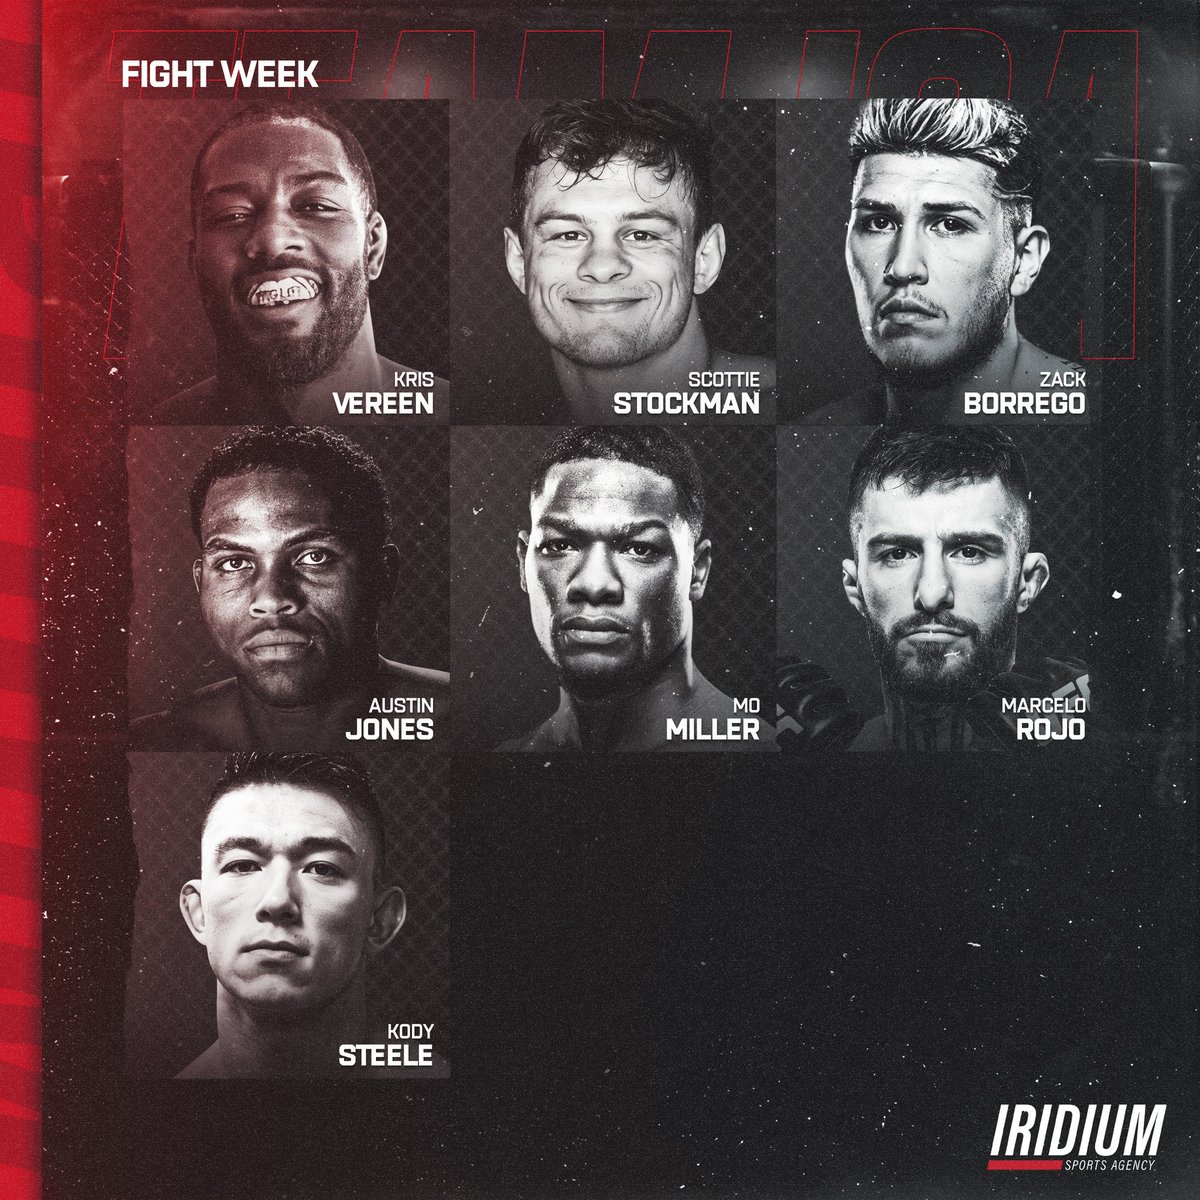 🚨 It's Fight Week for 7️⃣ of #TeamIridium's most promising young fighters 👊🏼 #TheDarkside